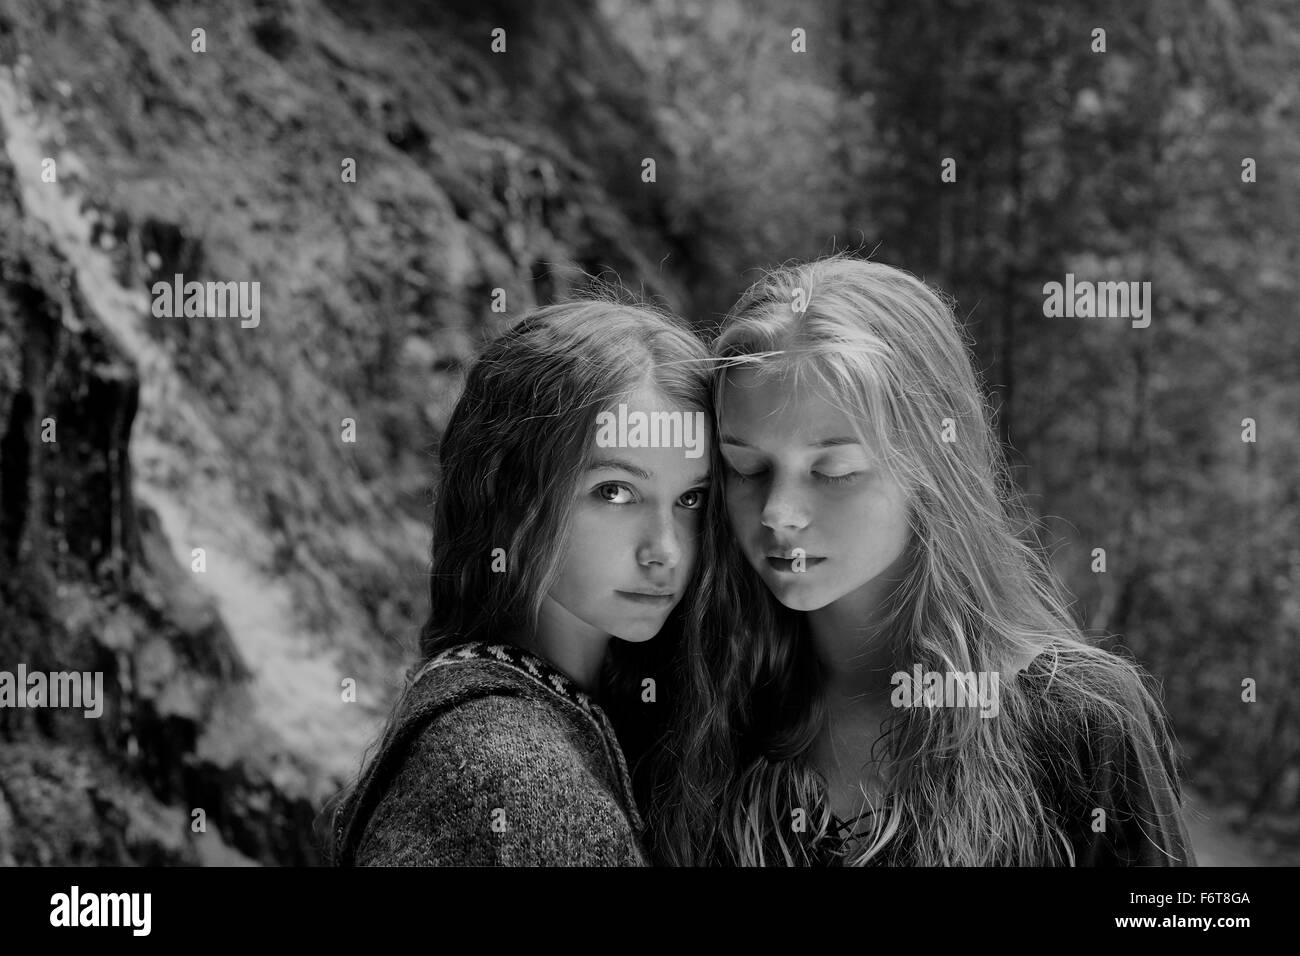 Caucasian teenage girls in forest Banque D'Images